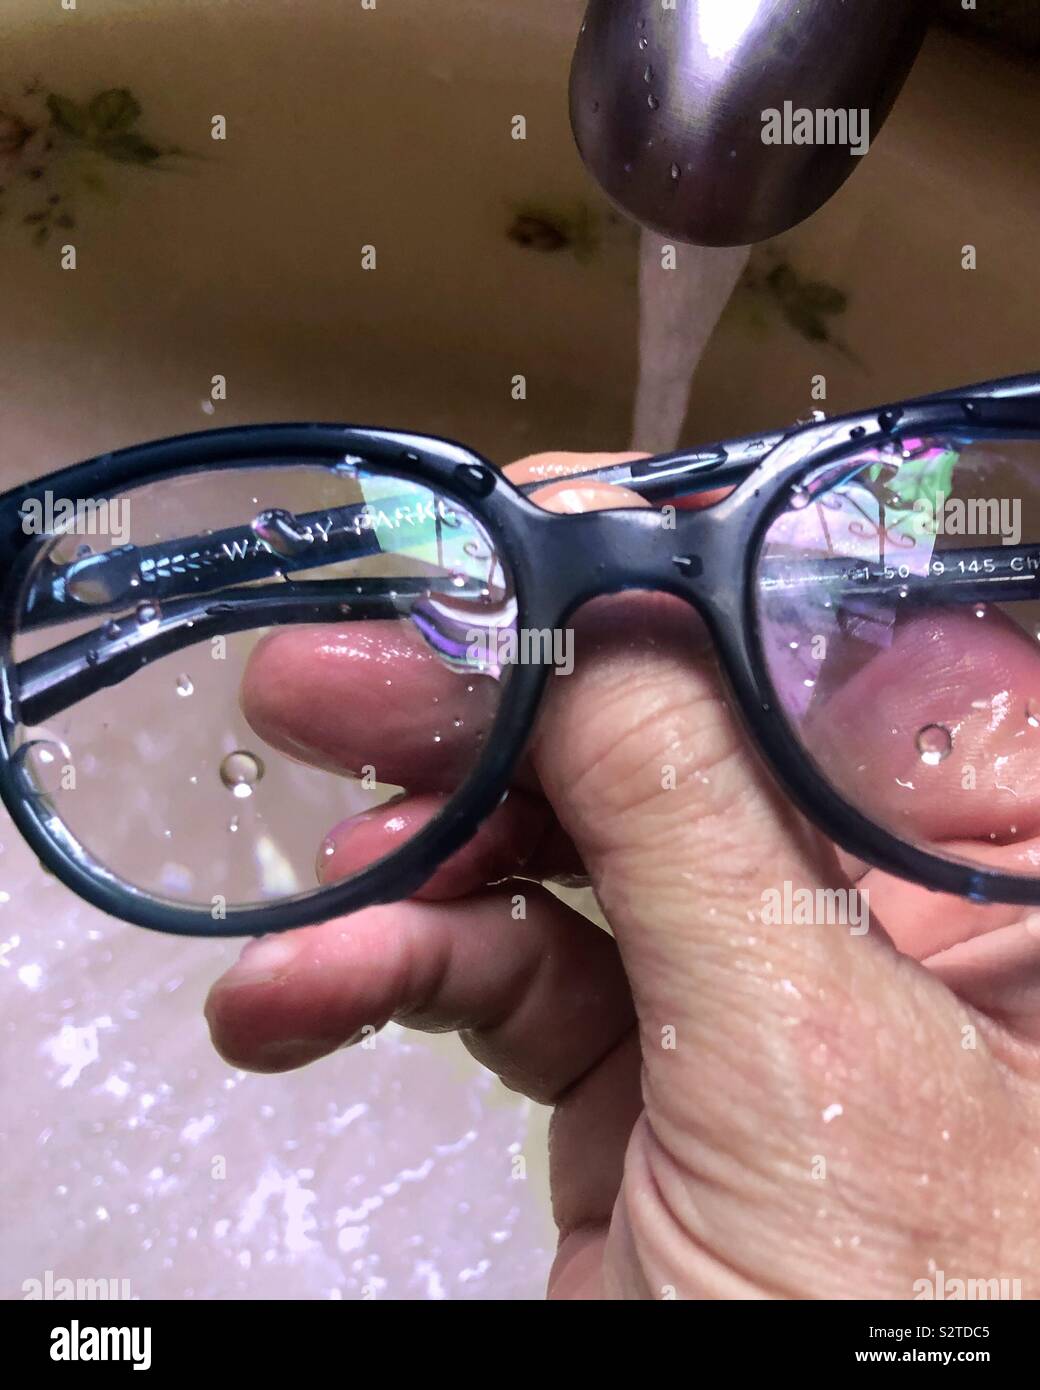 Cleaning my glasses. Stock Photo